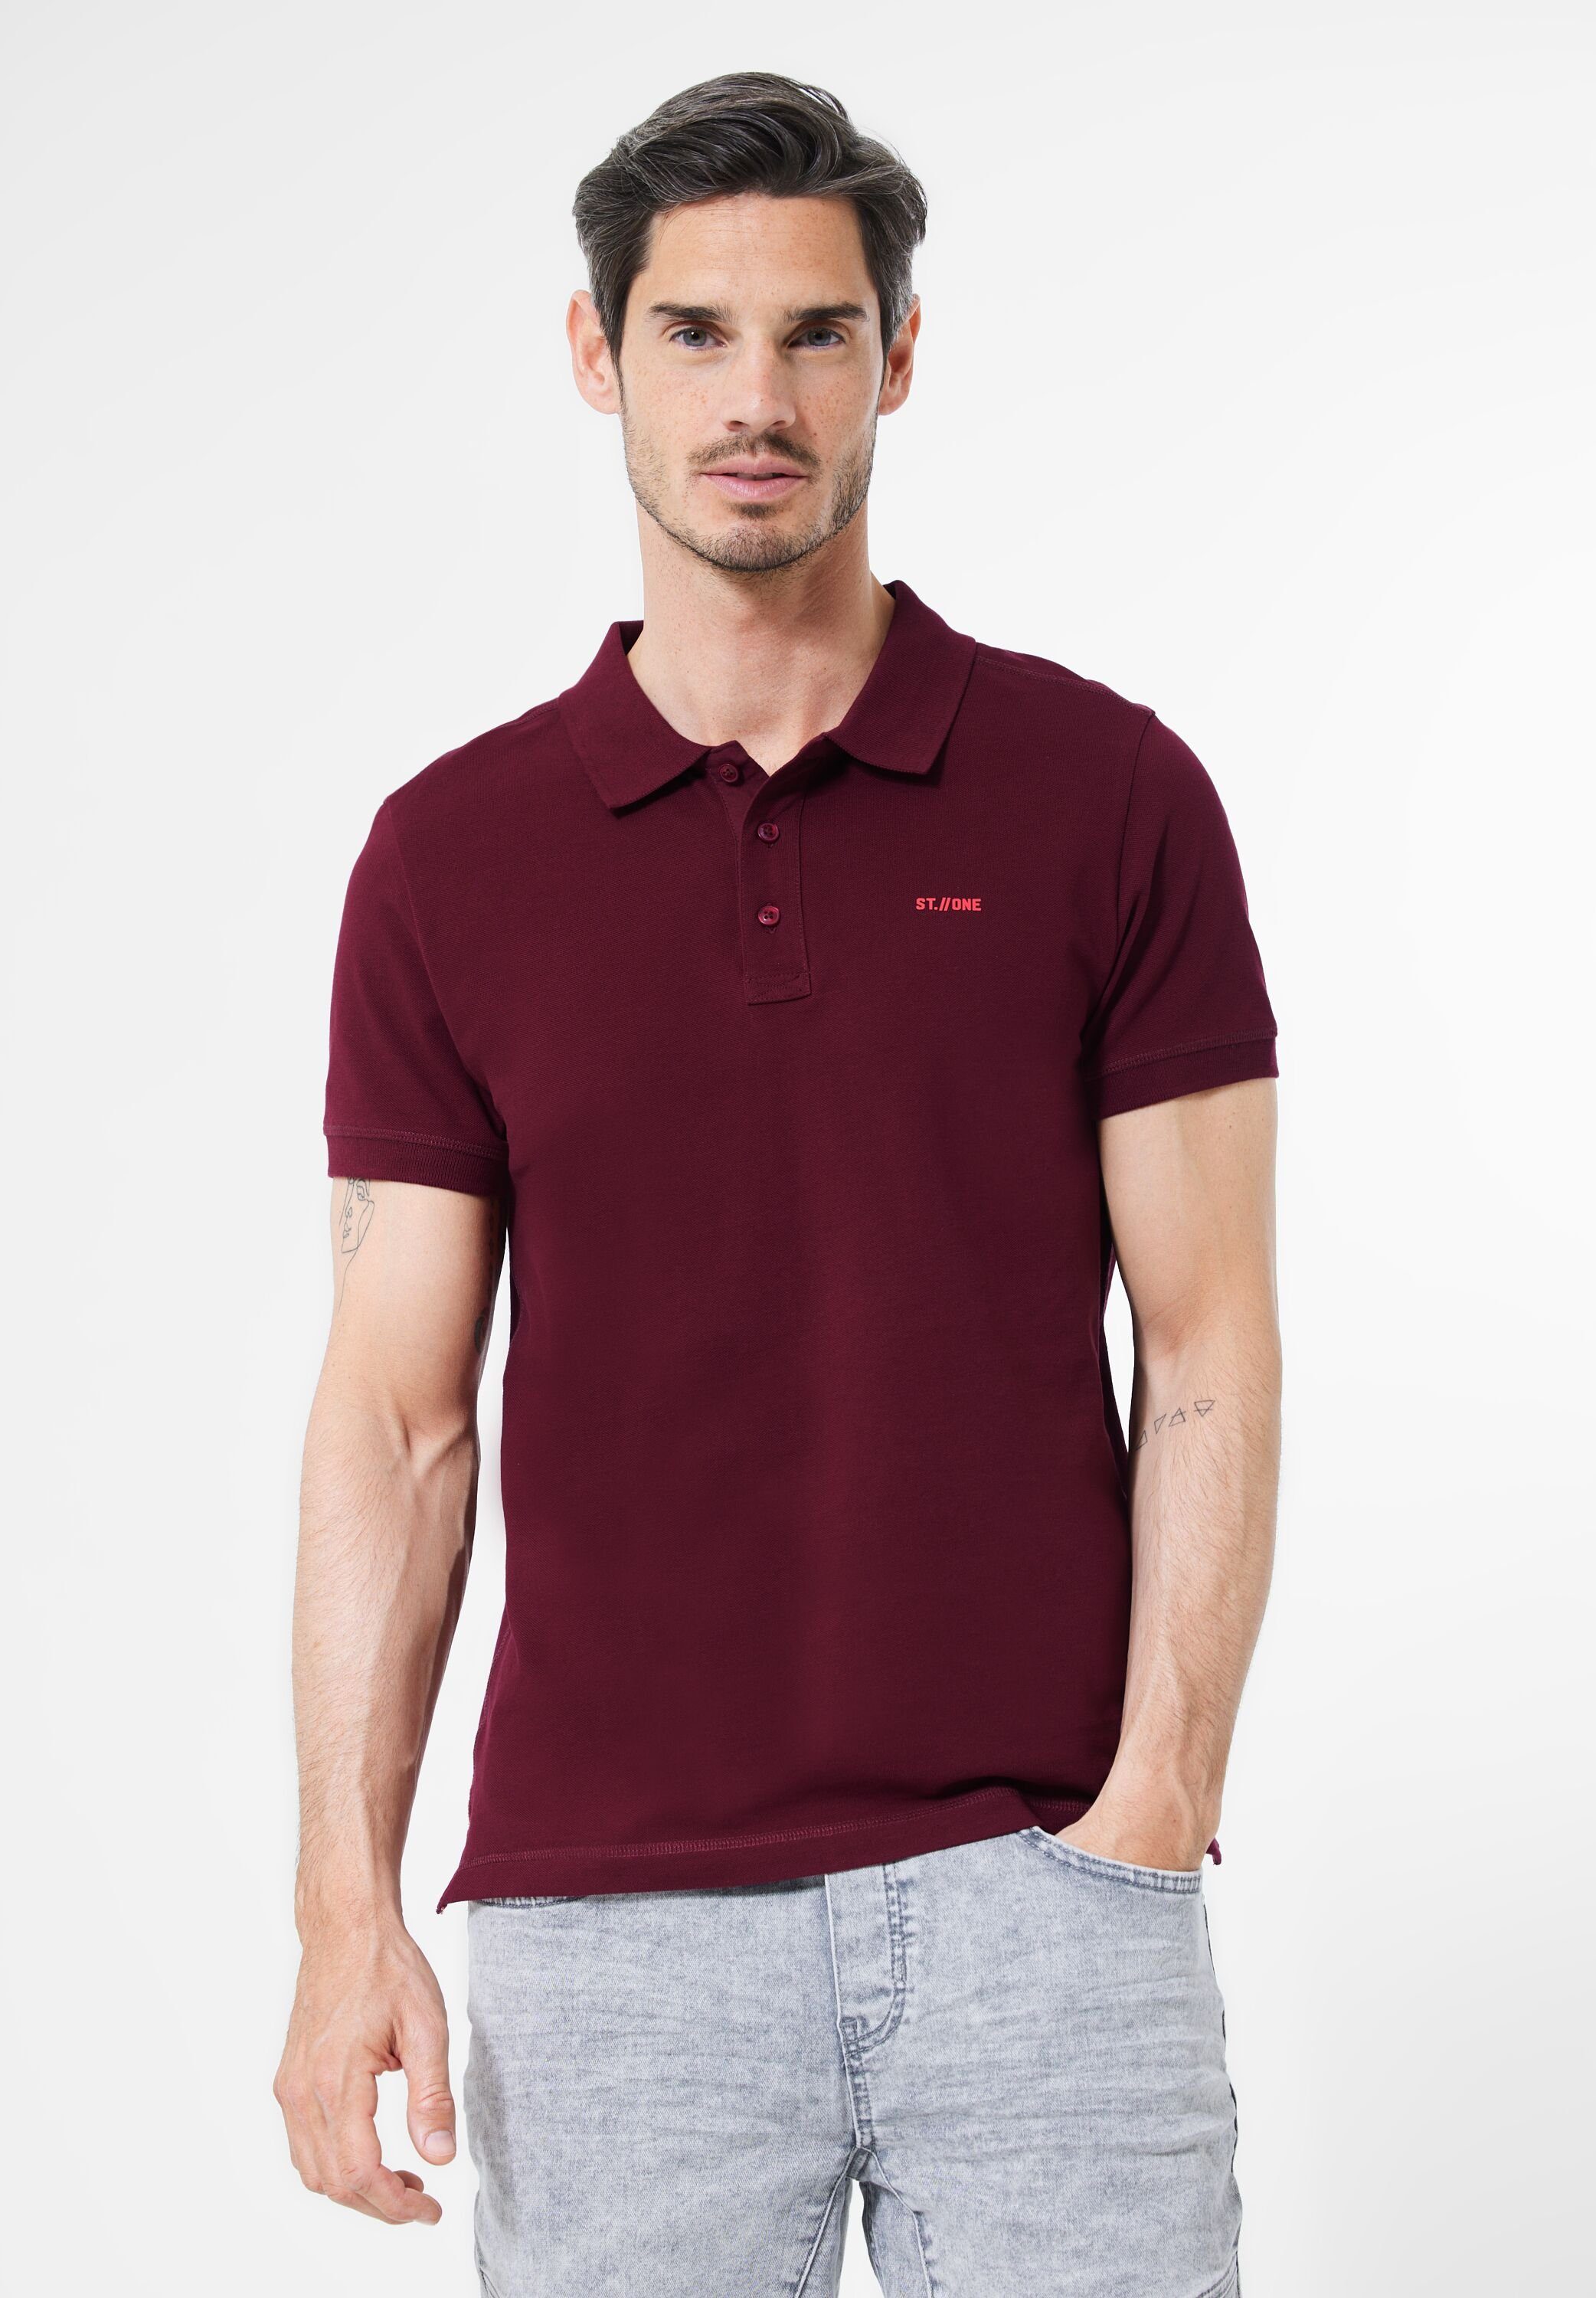 STREET ONE MEN Poloshirt in Unifarbe portwine red